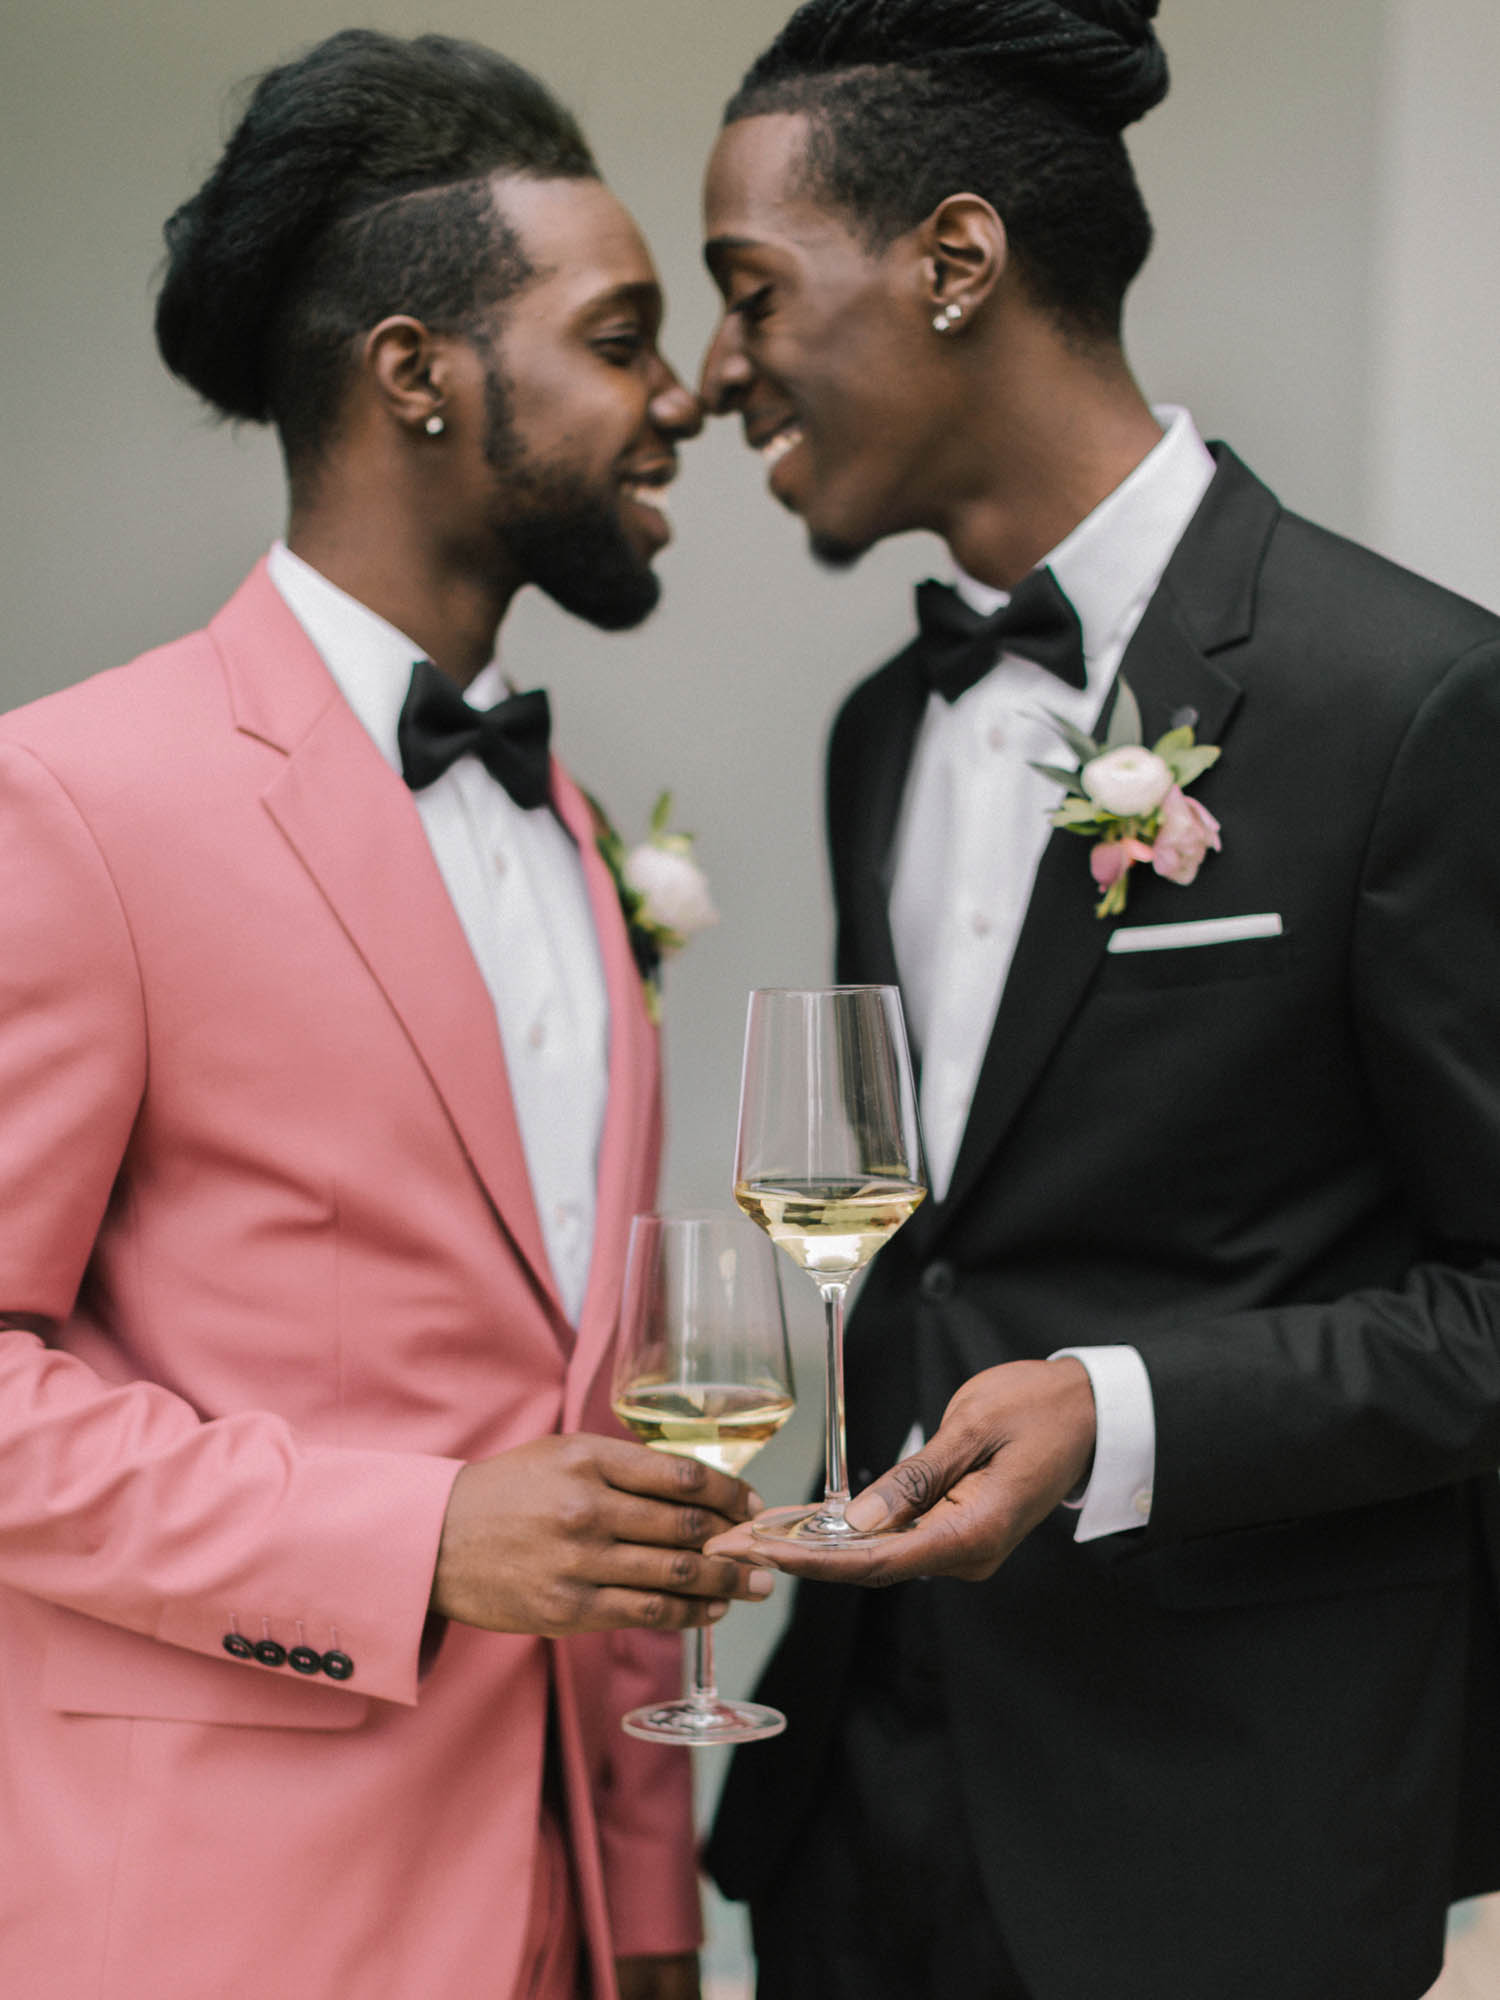 Romantic garden wedding inspiration with black and pink suits | Nadya Vysotskaya Photography | Featured on Equally Wed, the leading LGBTQ+ wedding magazine